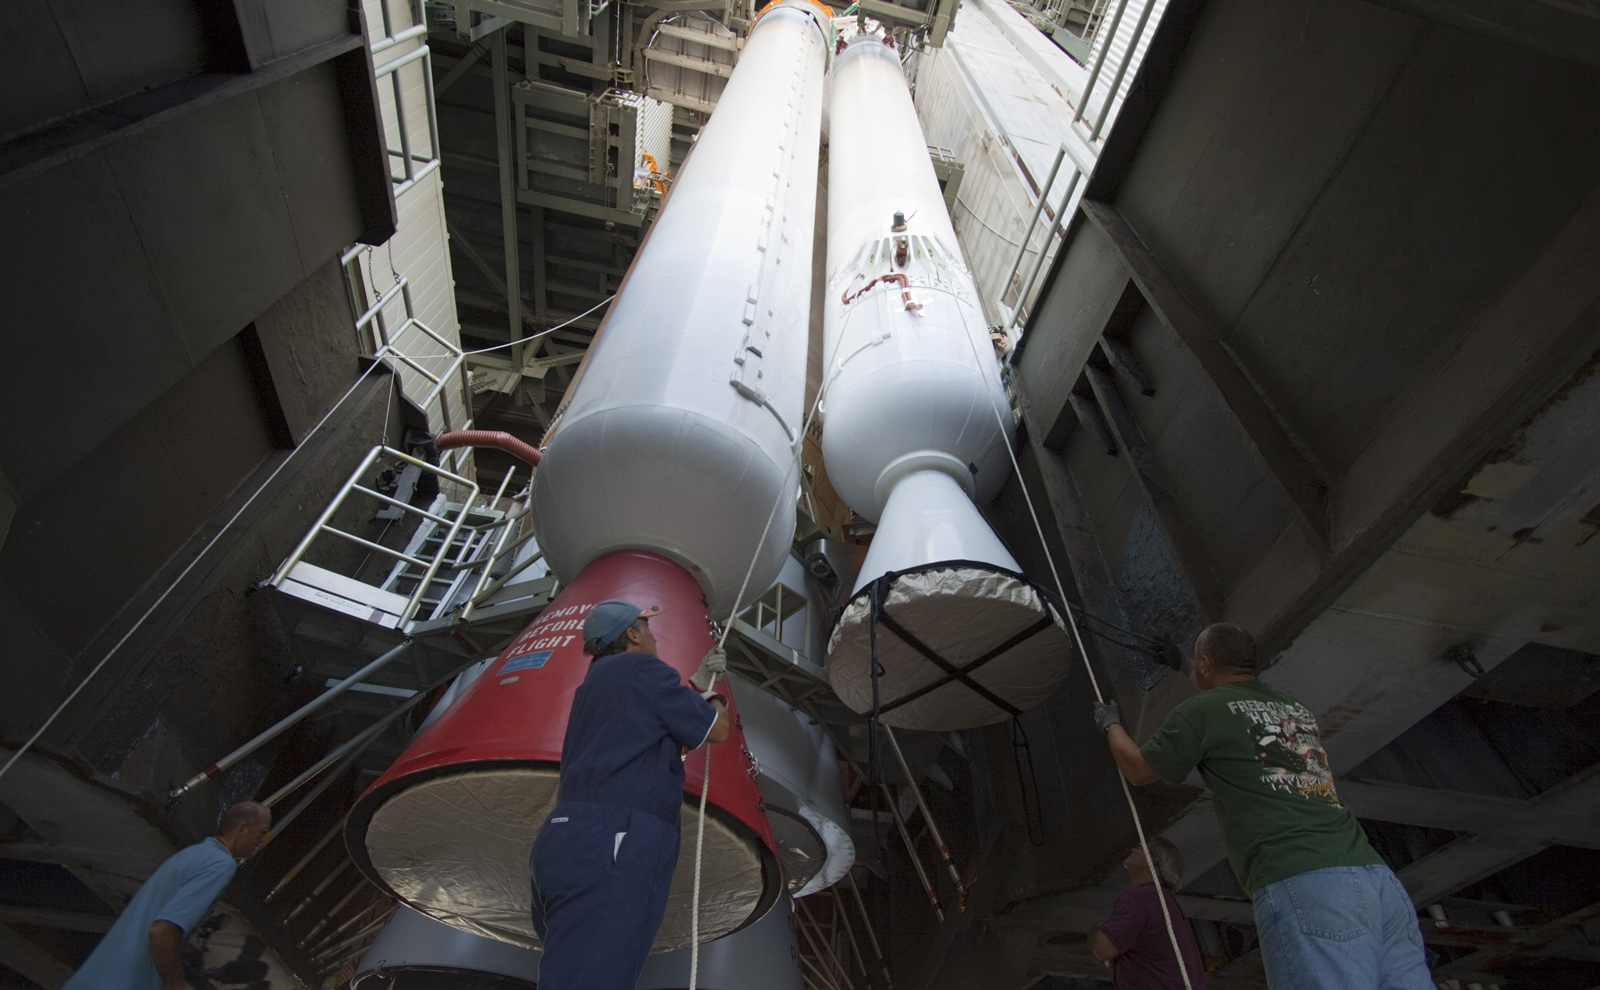 Inside the Vertical Integration Facility at Space Launch Complex 41 on Cape Canaveral Air Force Station in Florida, technicians using an overhead crane guide the final solid rocket motor into position for mating to the first stage of a United Launch Alliance Atlas V rocket.